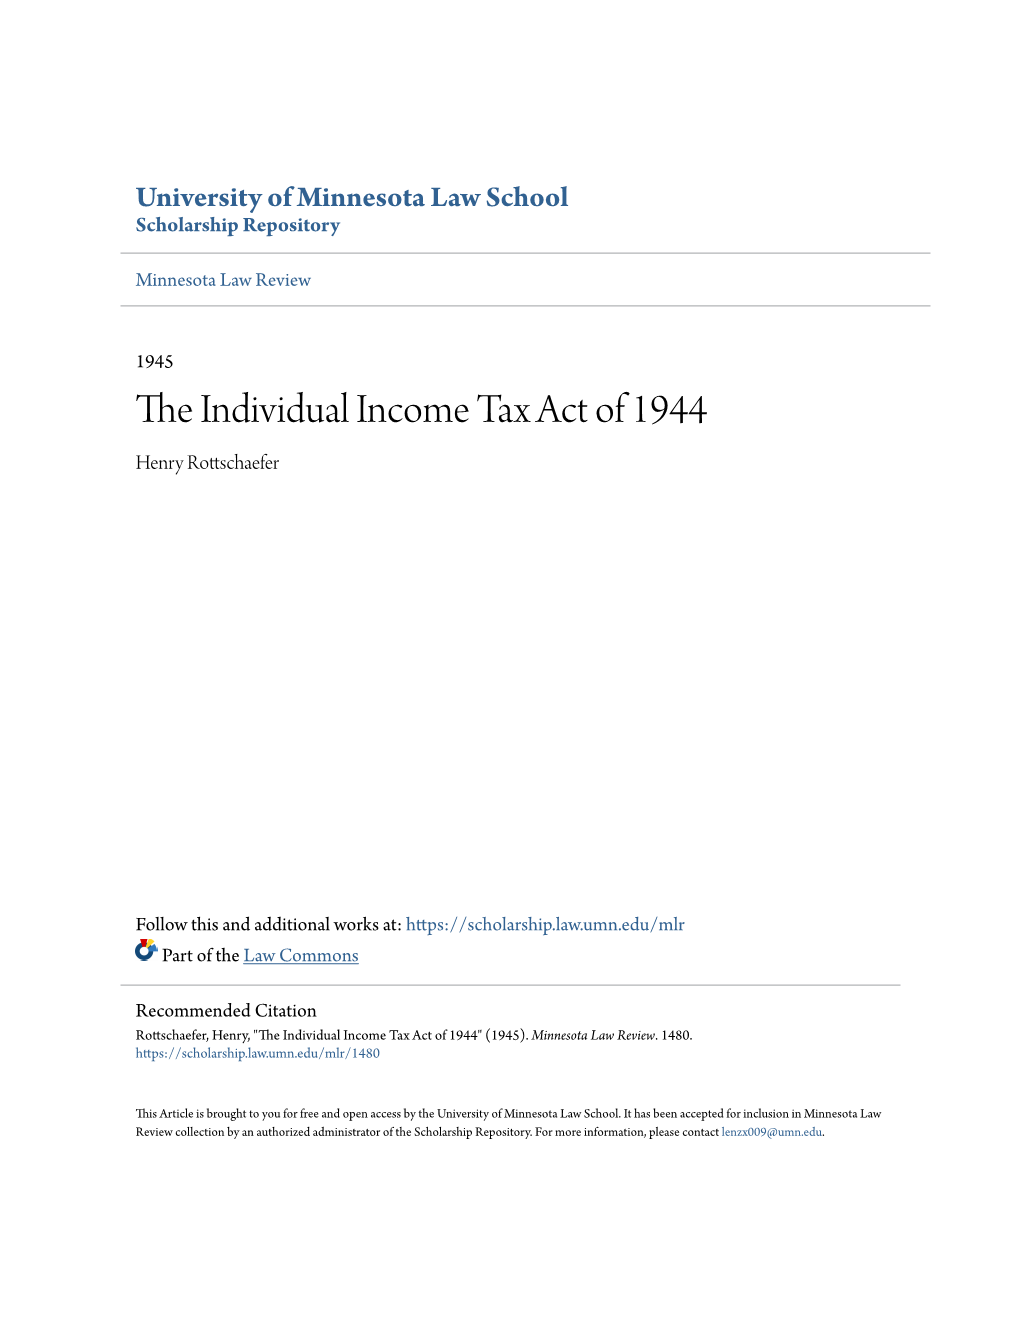 The Individual Income Tax Act of 1944